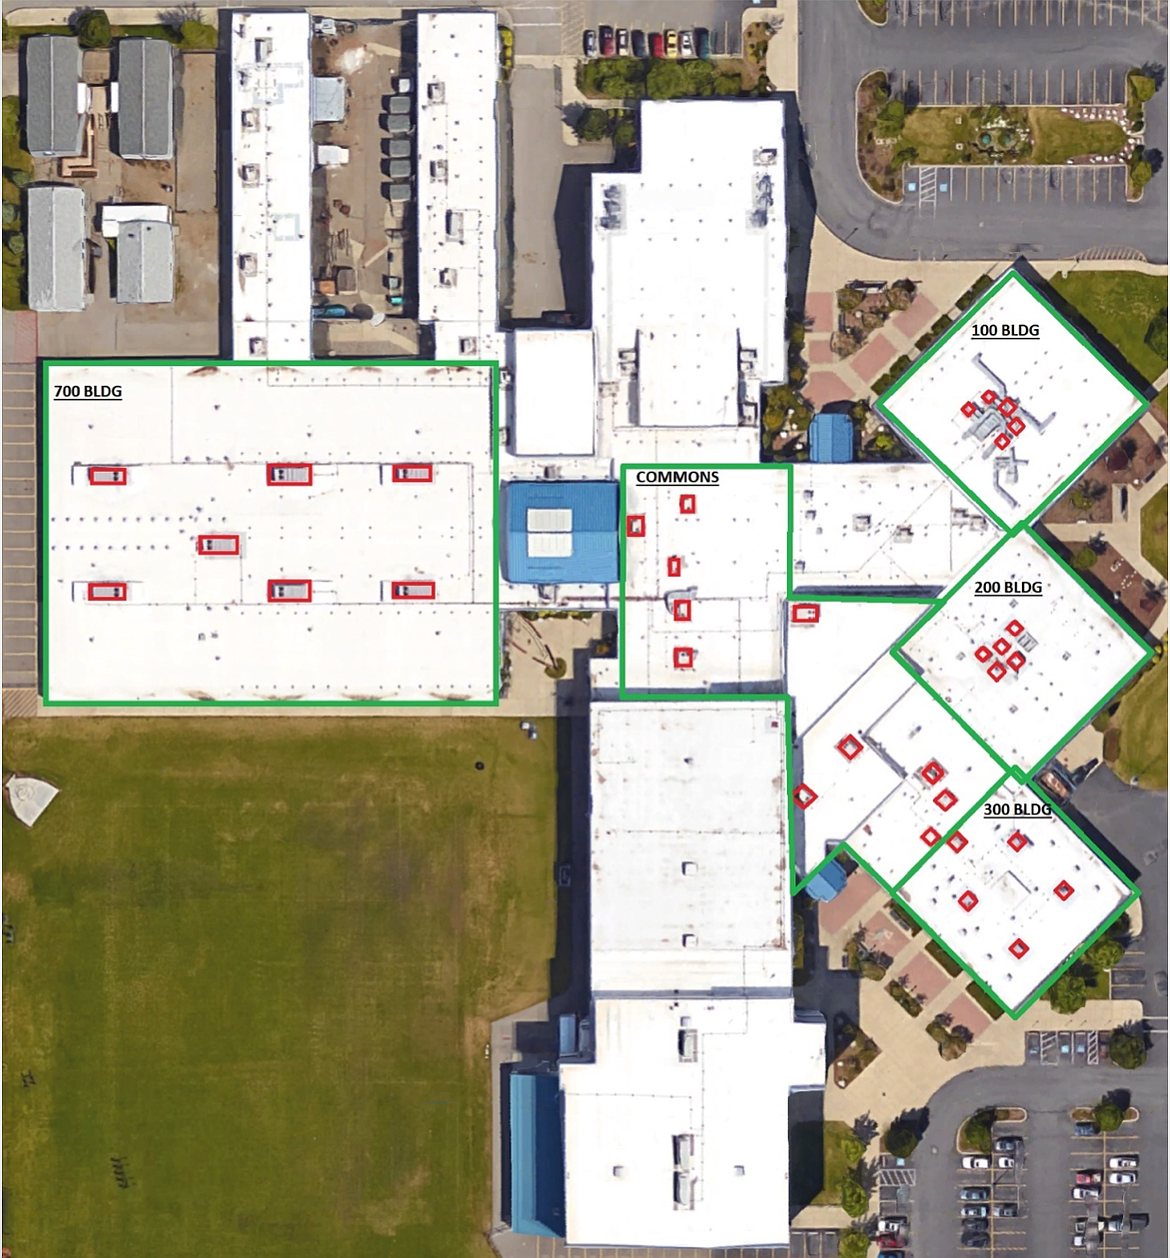 This image of Coeur d'Alene High School uses green outlines to identify the building areas being considered for upgrades. The red outlines surround the HVAC units that are proposed to be replaced. Courtesy of the Coeur d'Alene School District